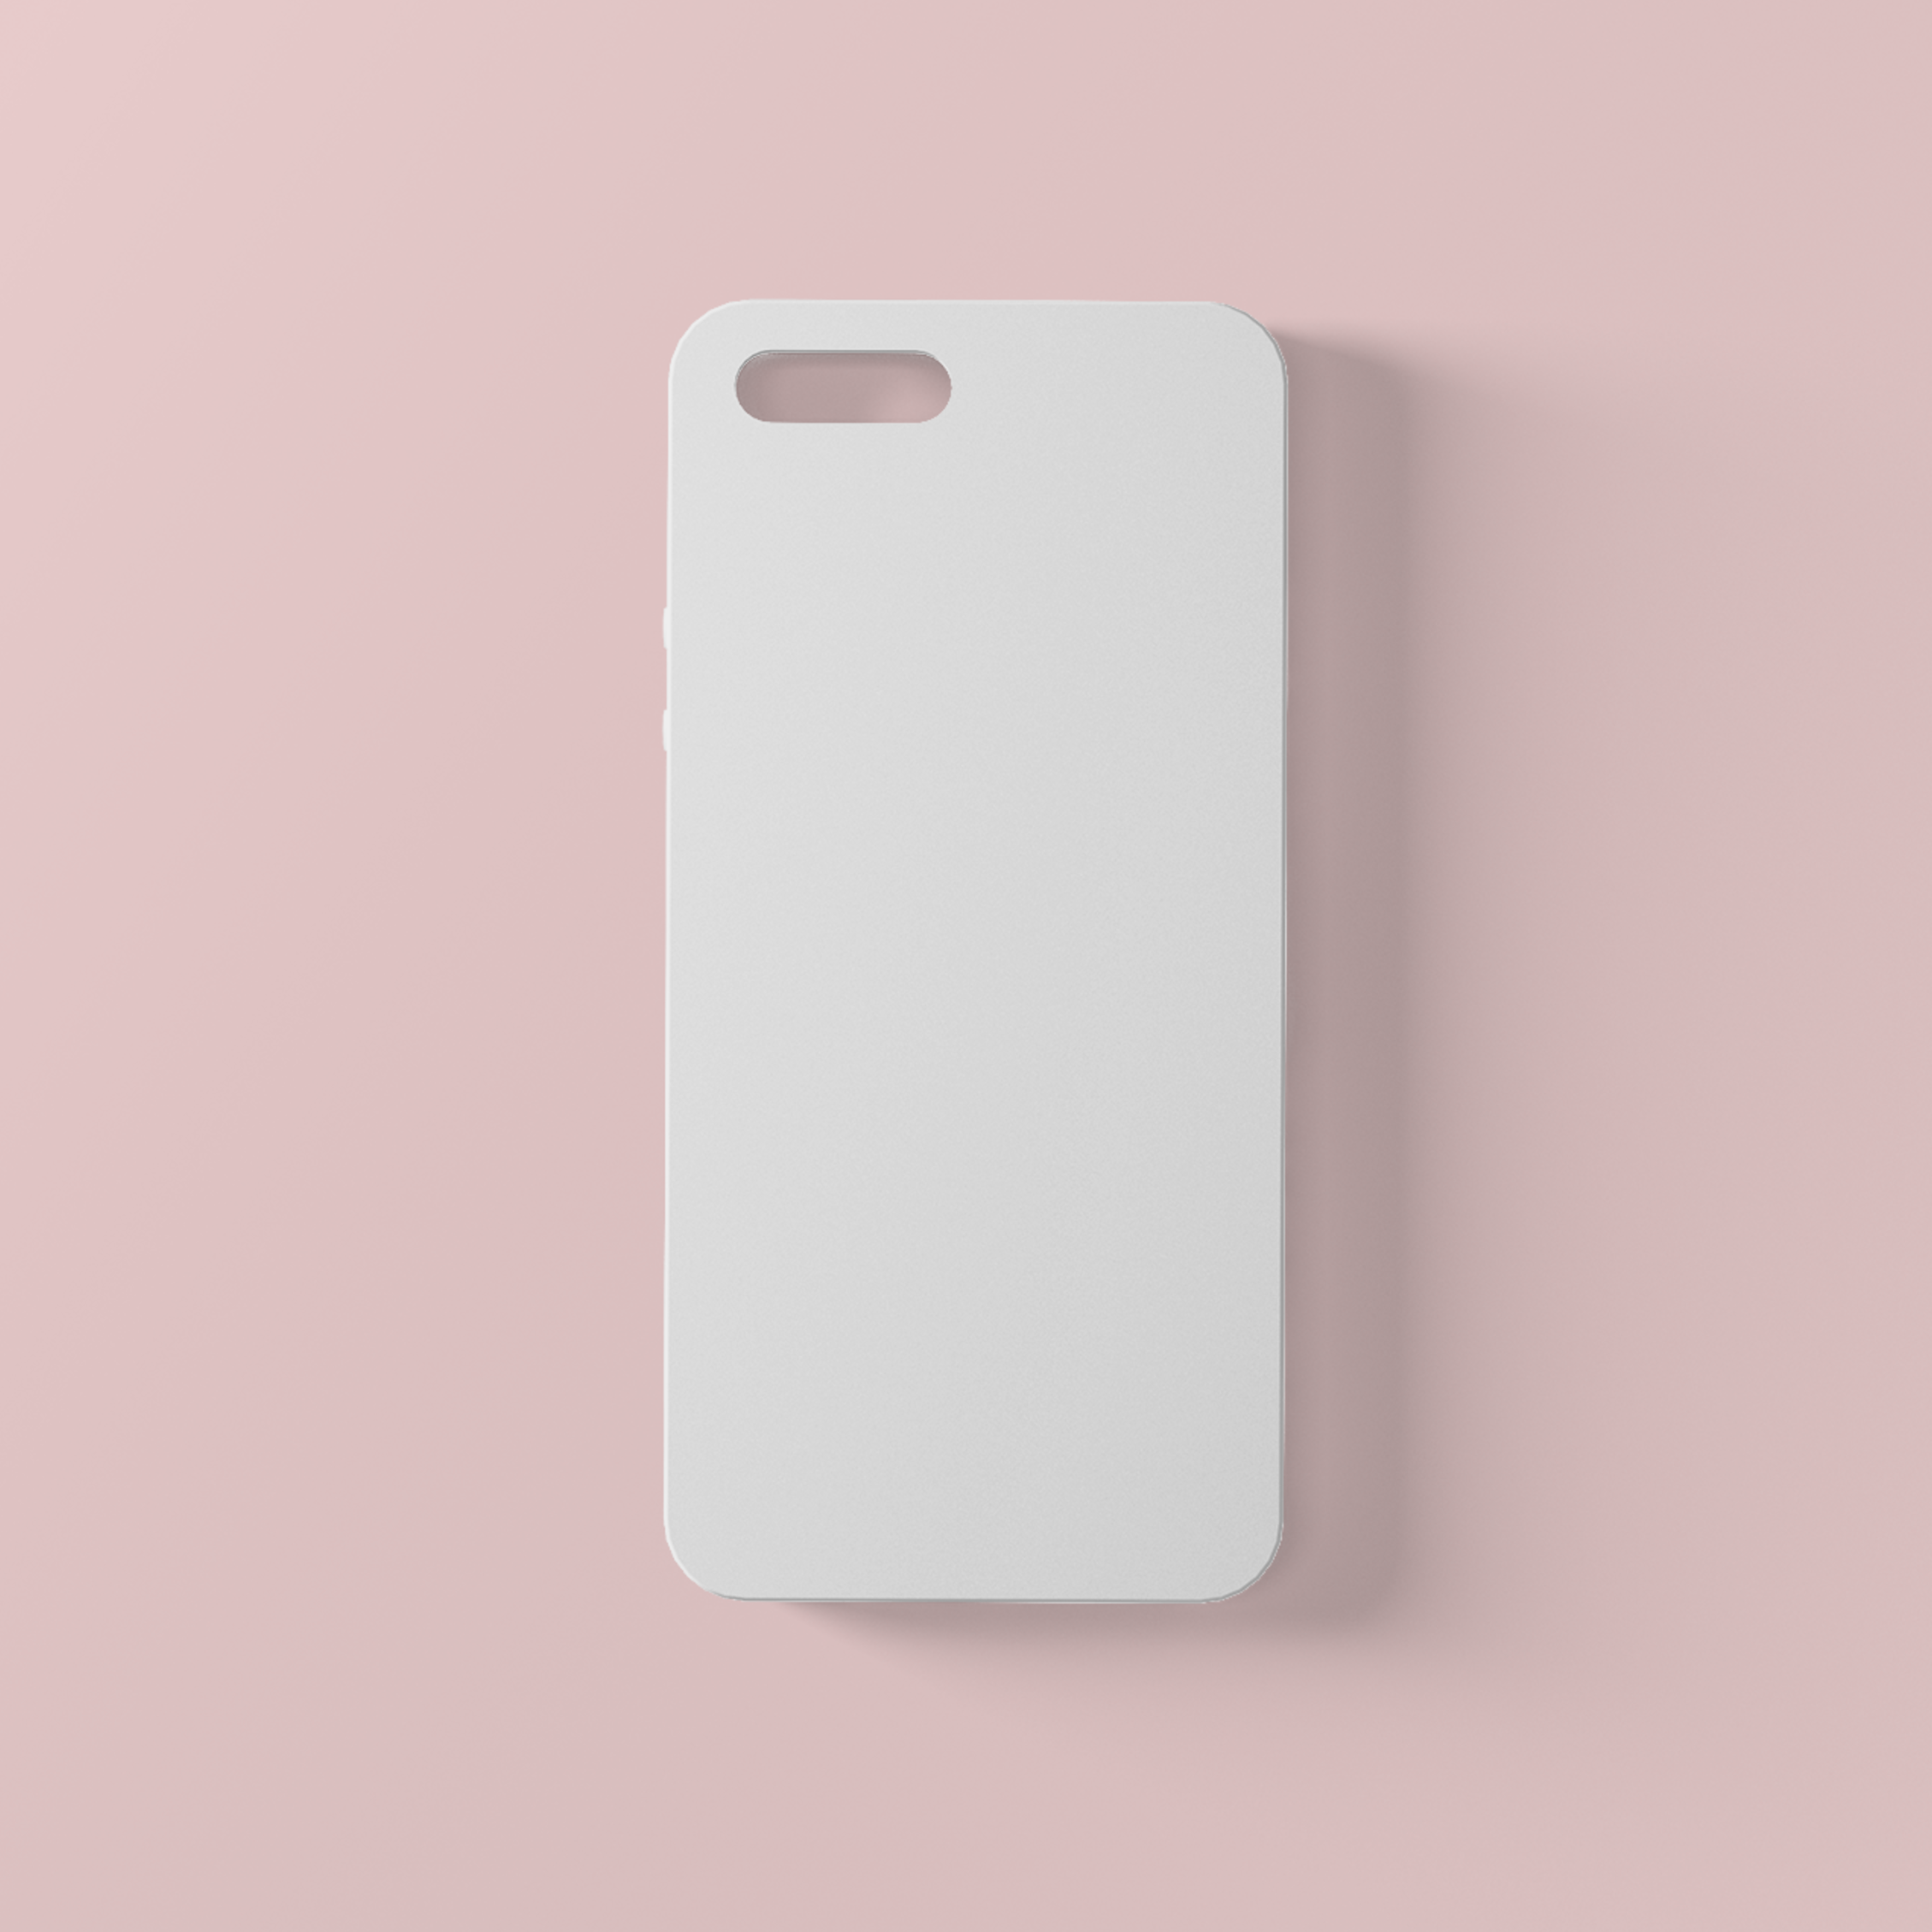 Customized phone case - Add your picture